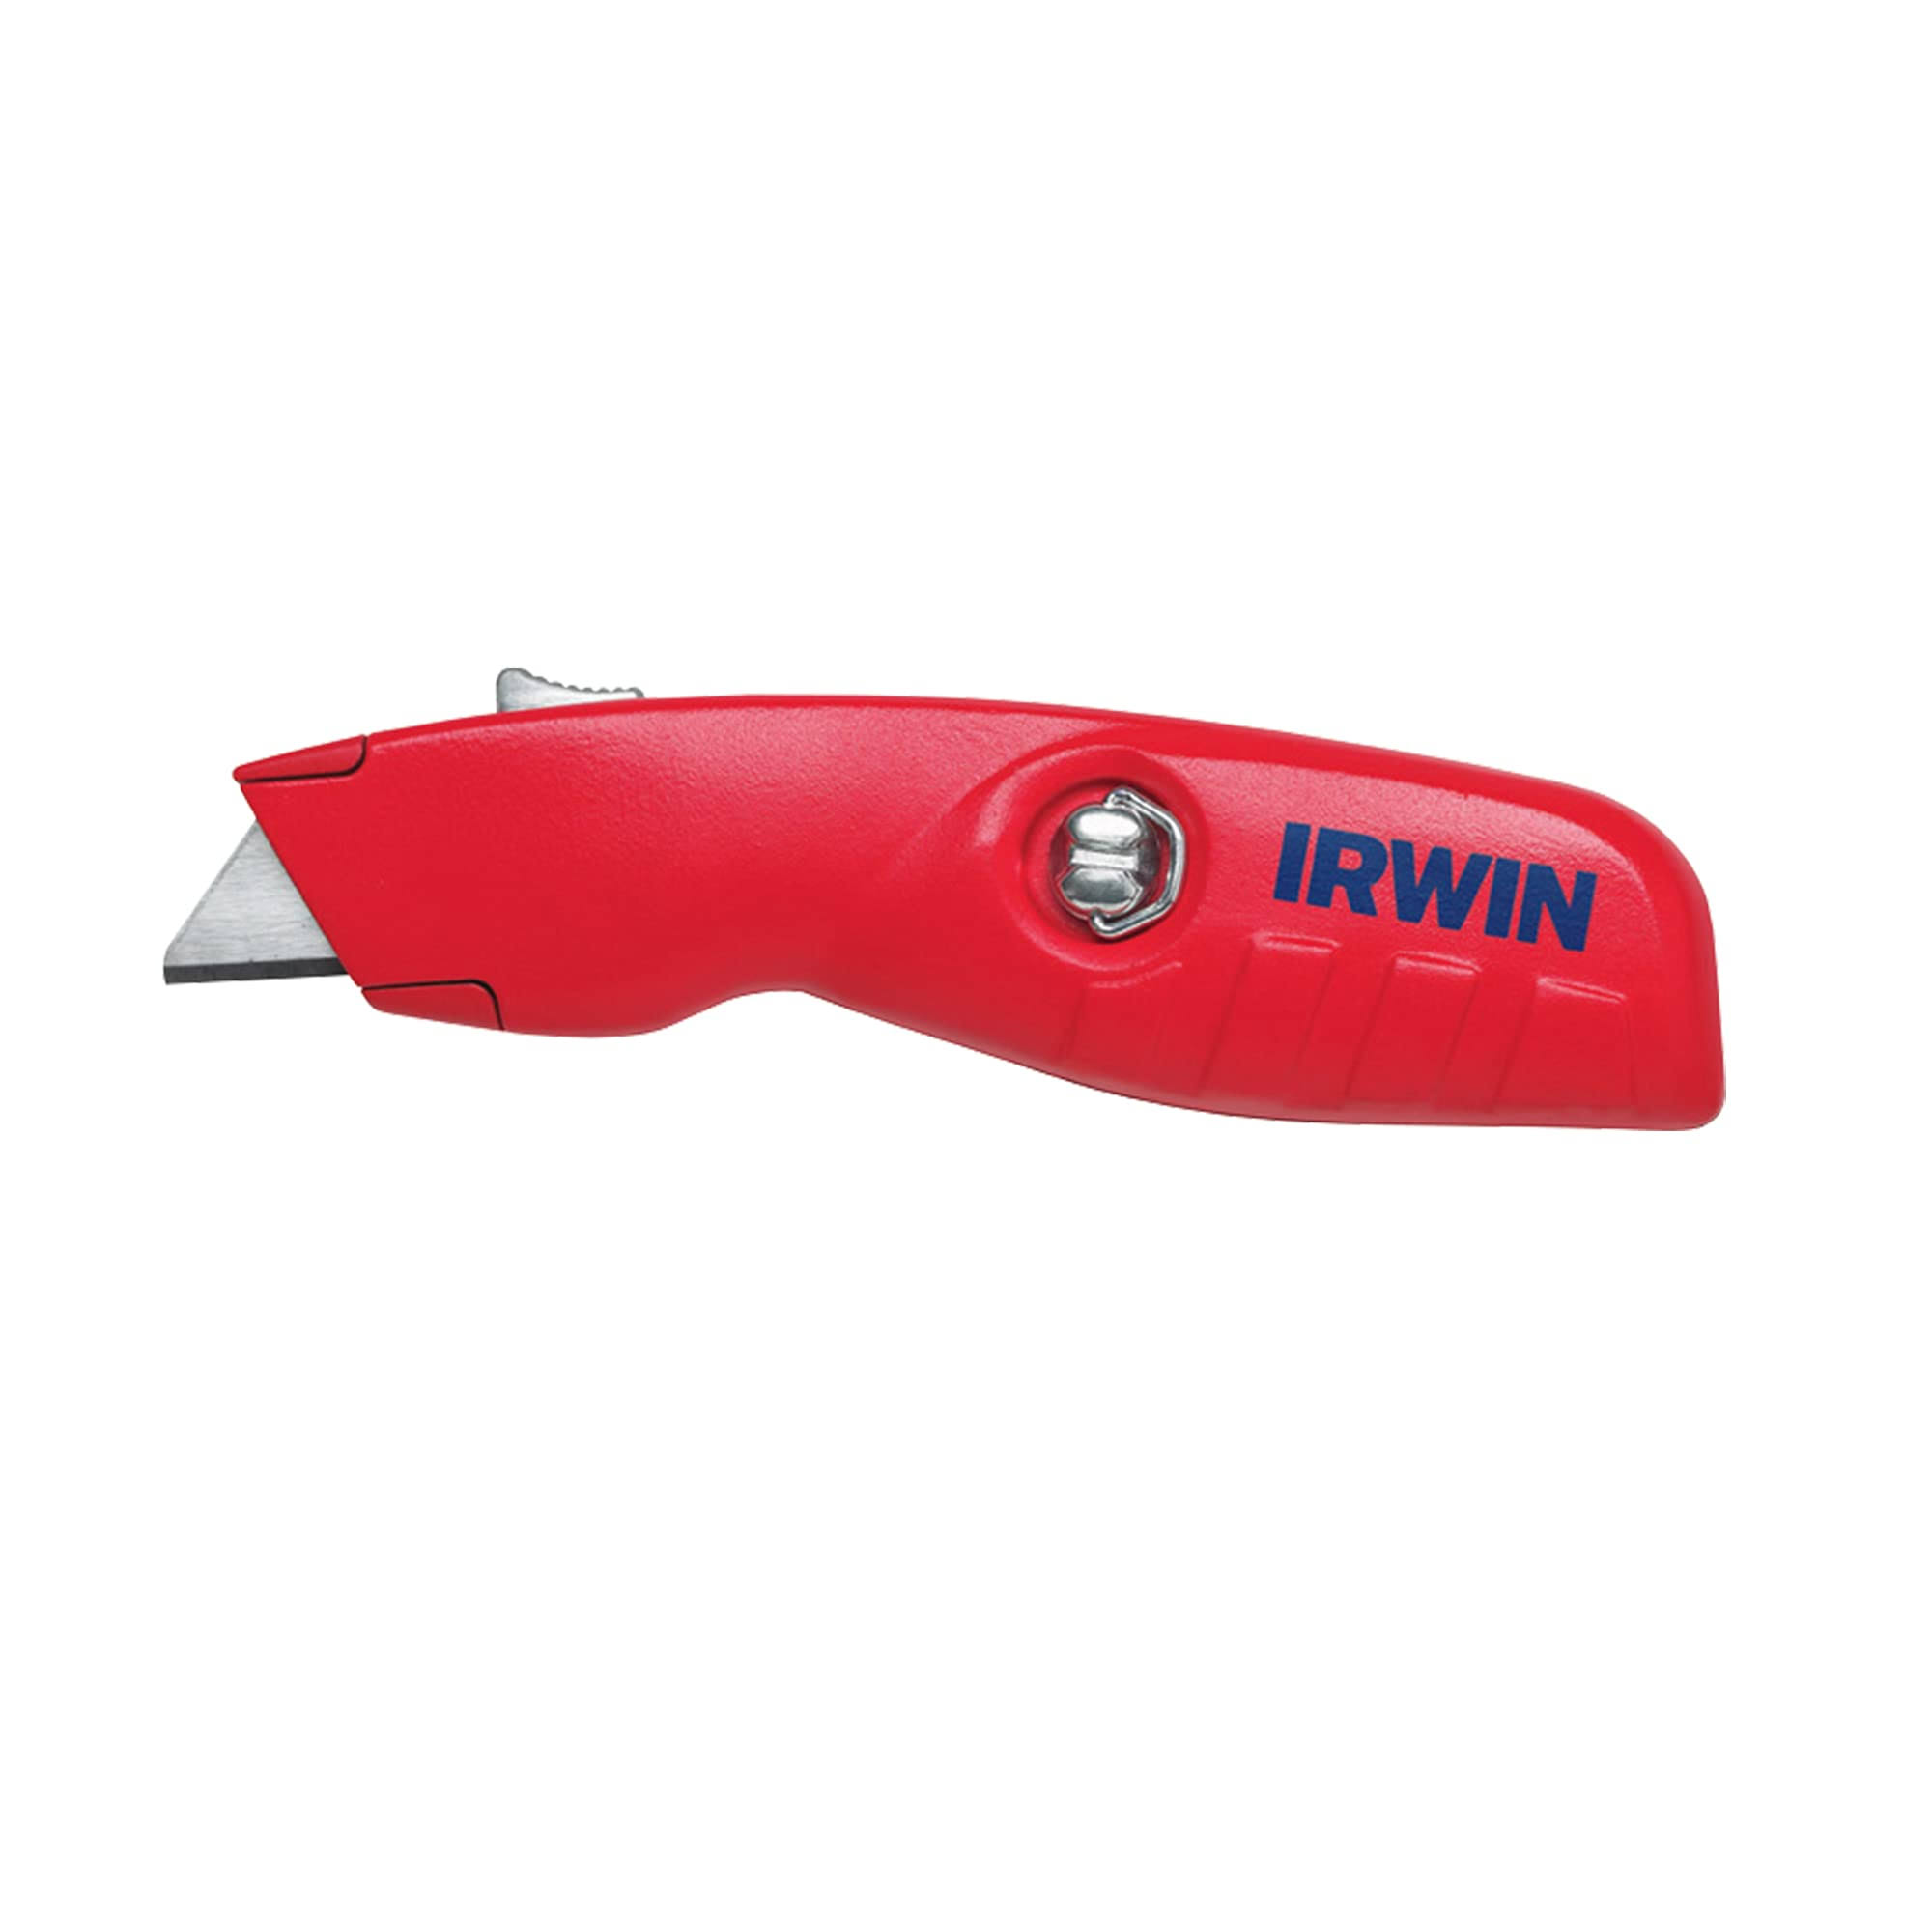 Irwin Tools Self-Retracting Safety Knife - Red